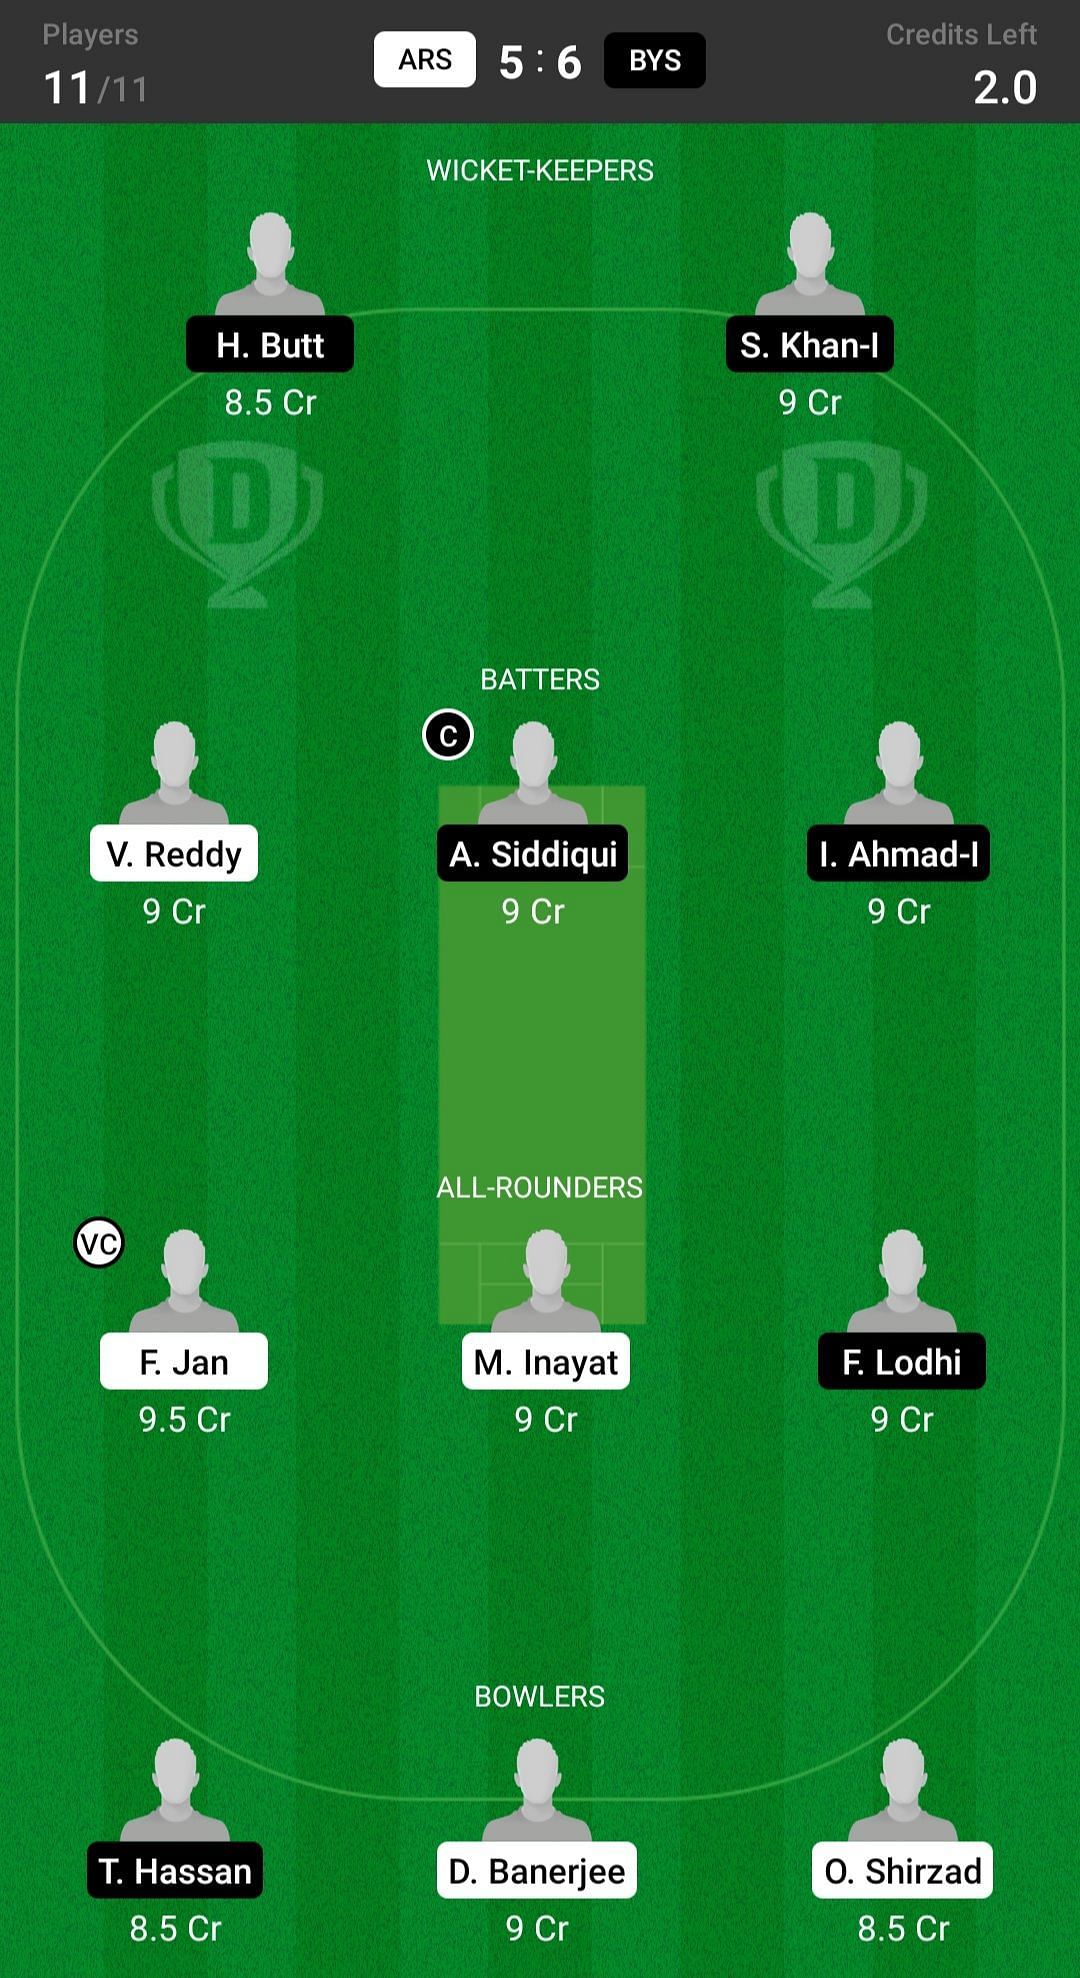 ARS vs BYS Dream11 Prediction Fantasy Cricket Tips, Todays Playing 11s and Pitch Report for FanCode ECS T10 Krefeld, Match 3 and 4